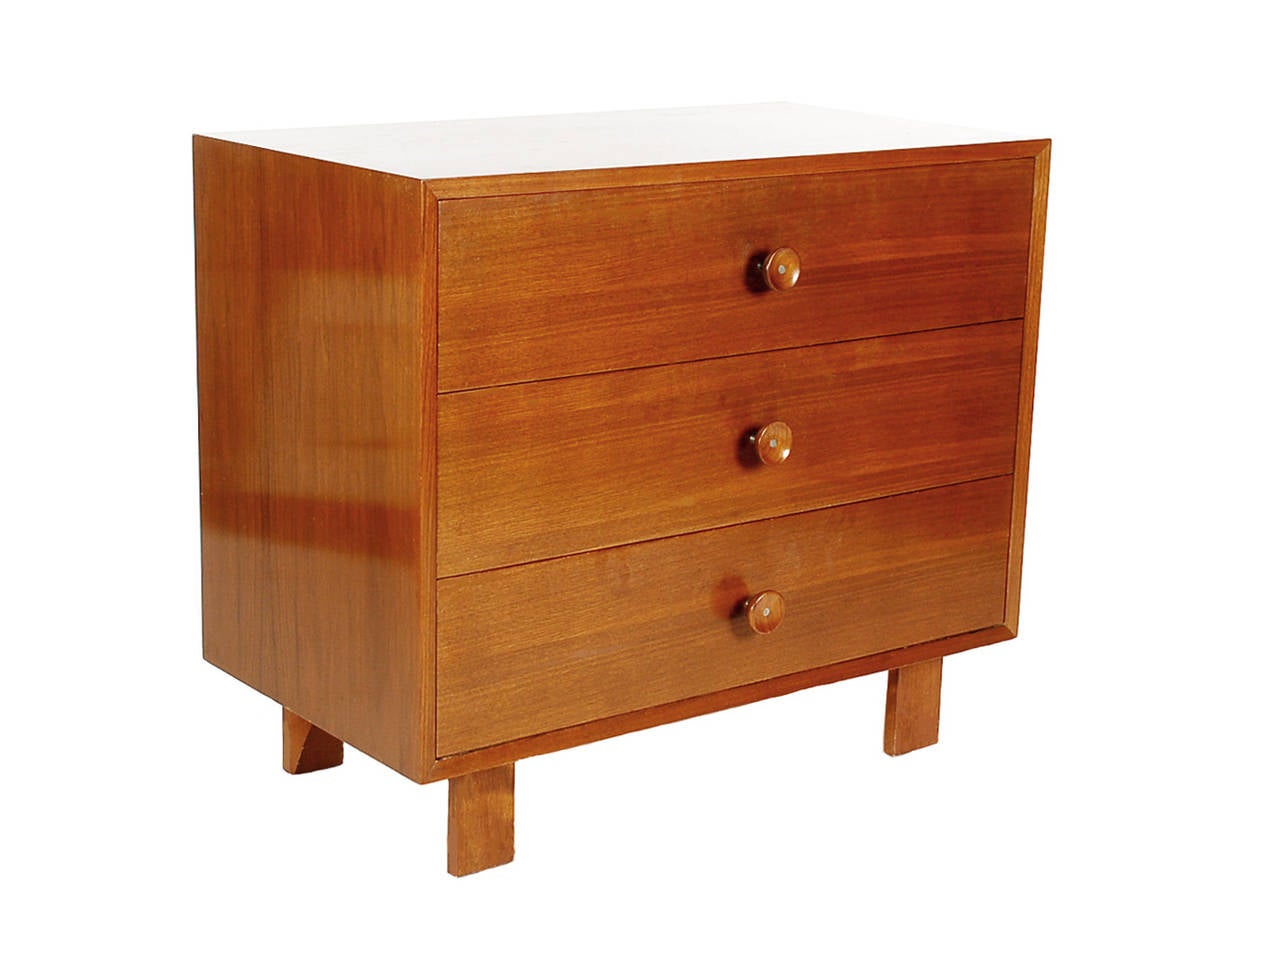 A nice low key chest designed by George Nelson for Herman Miller. It features walnut legs and walnut pulls on walnut case. Manufacturer label.